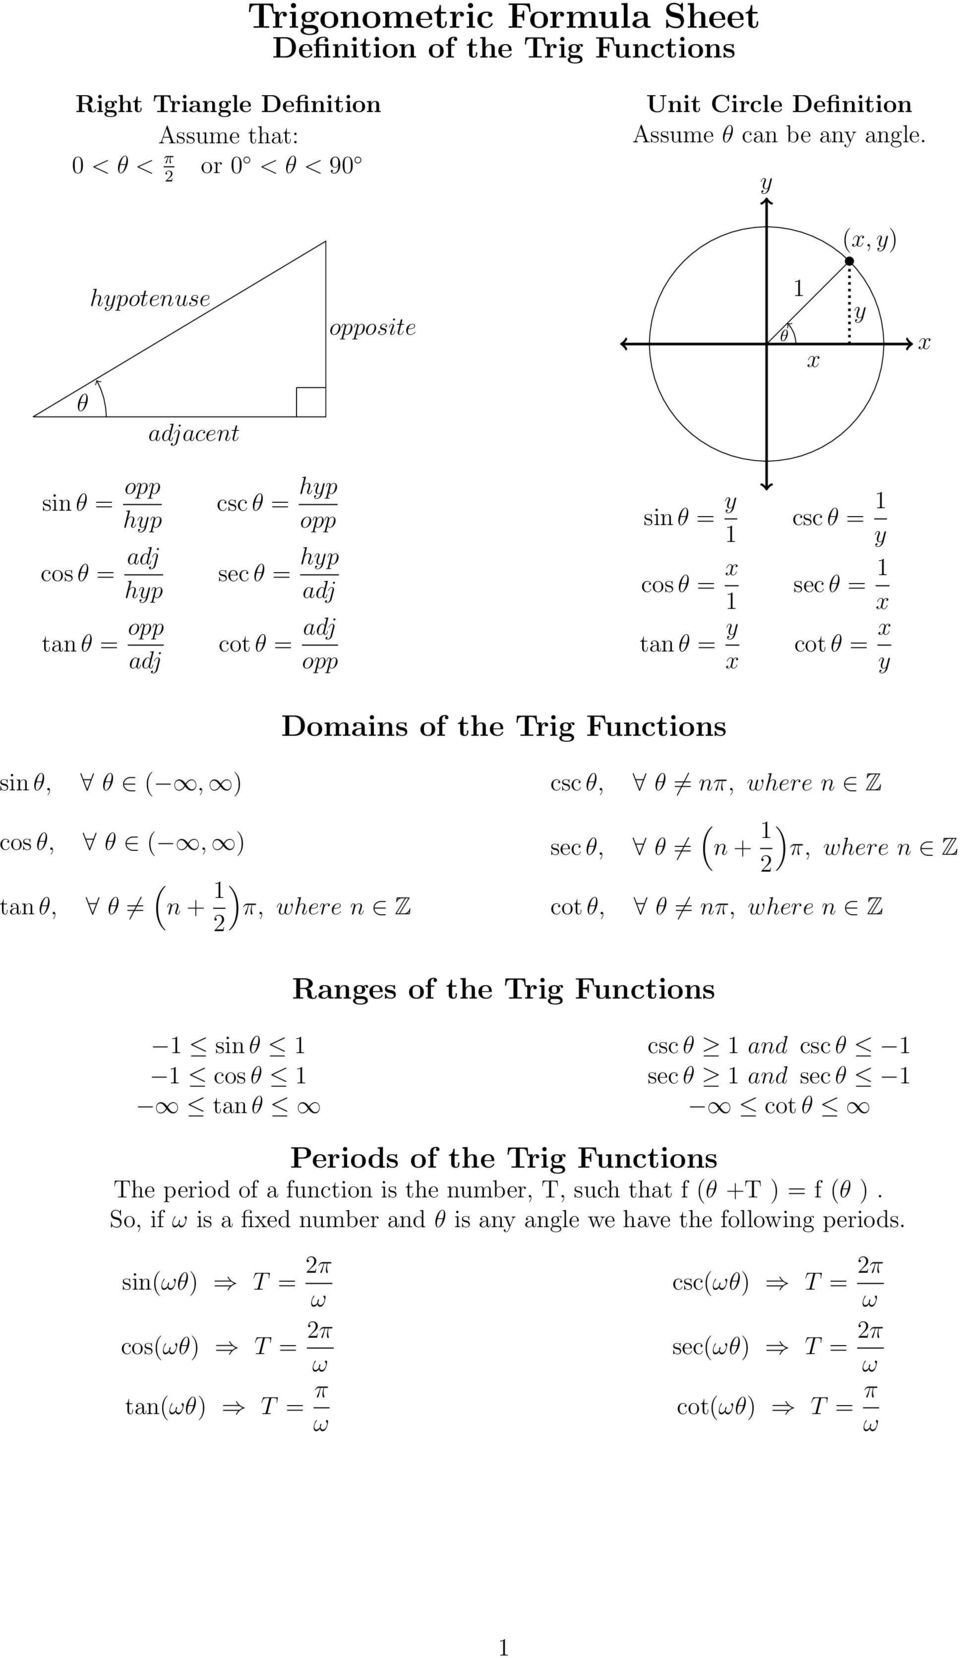 = x y Domains of the Trig Functions sin θ, θ, cos θ, θ, tan θ, θ n +, where n Z csc θ, sec θ, cot θ, θ n, where n Z θ n +, where n Z θ n, where n Z Ranges of the Trig Functions sin θ cos θ tan θ csc